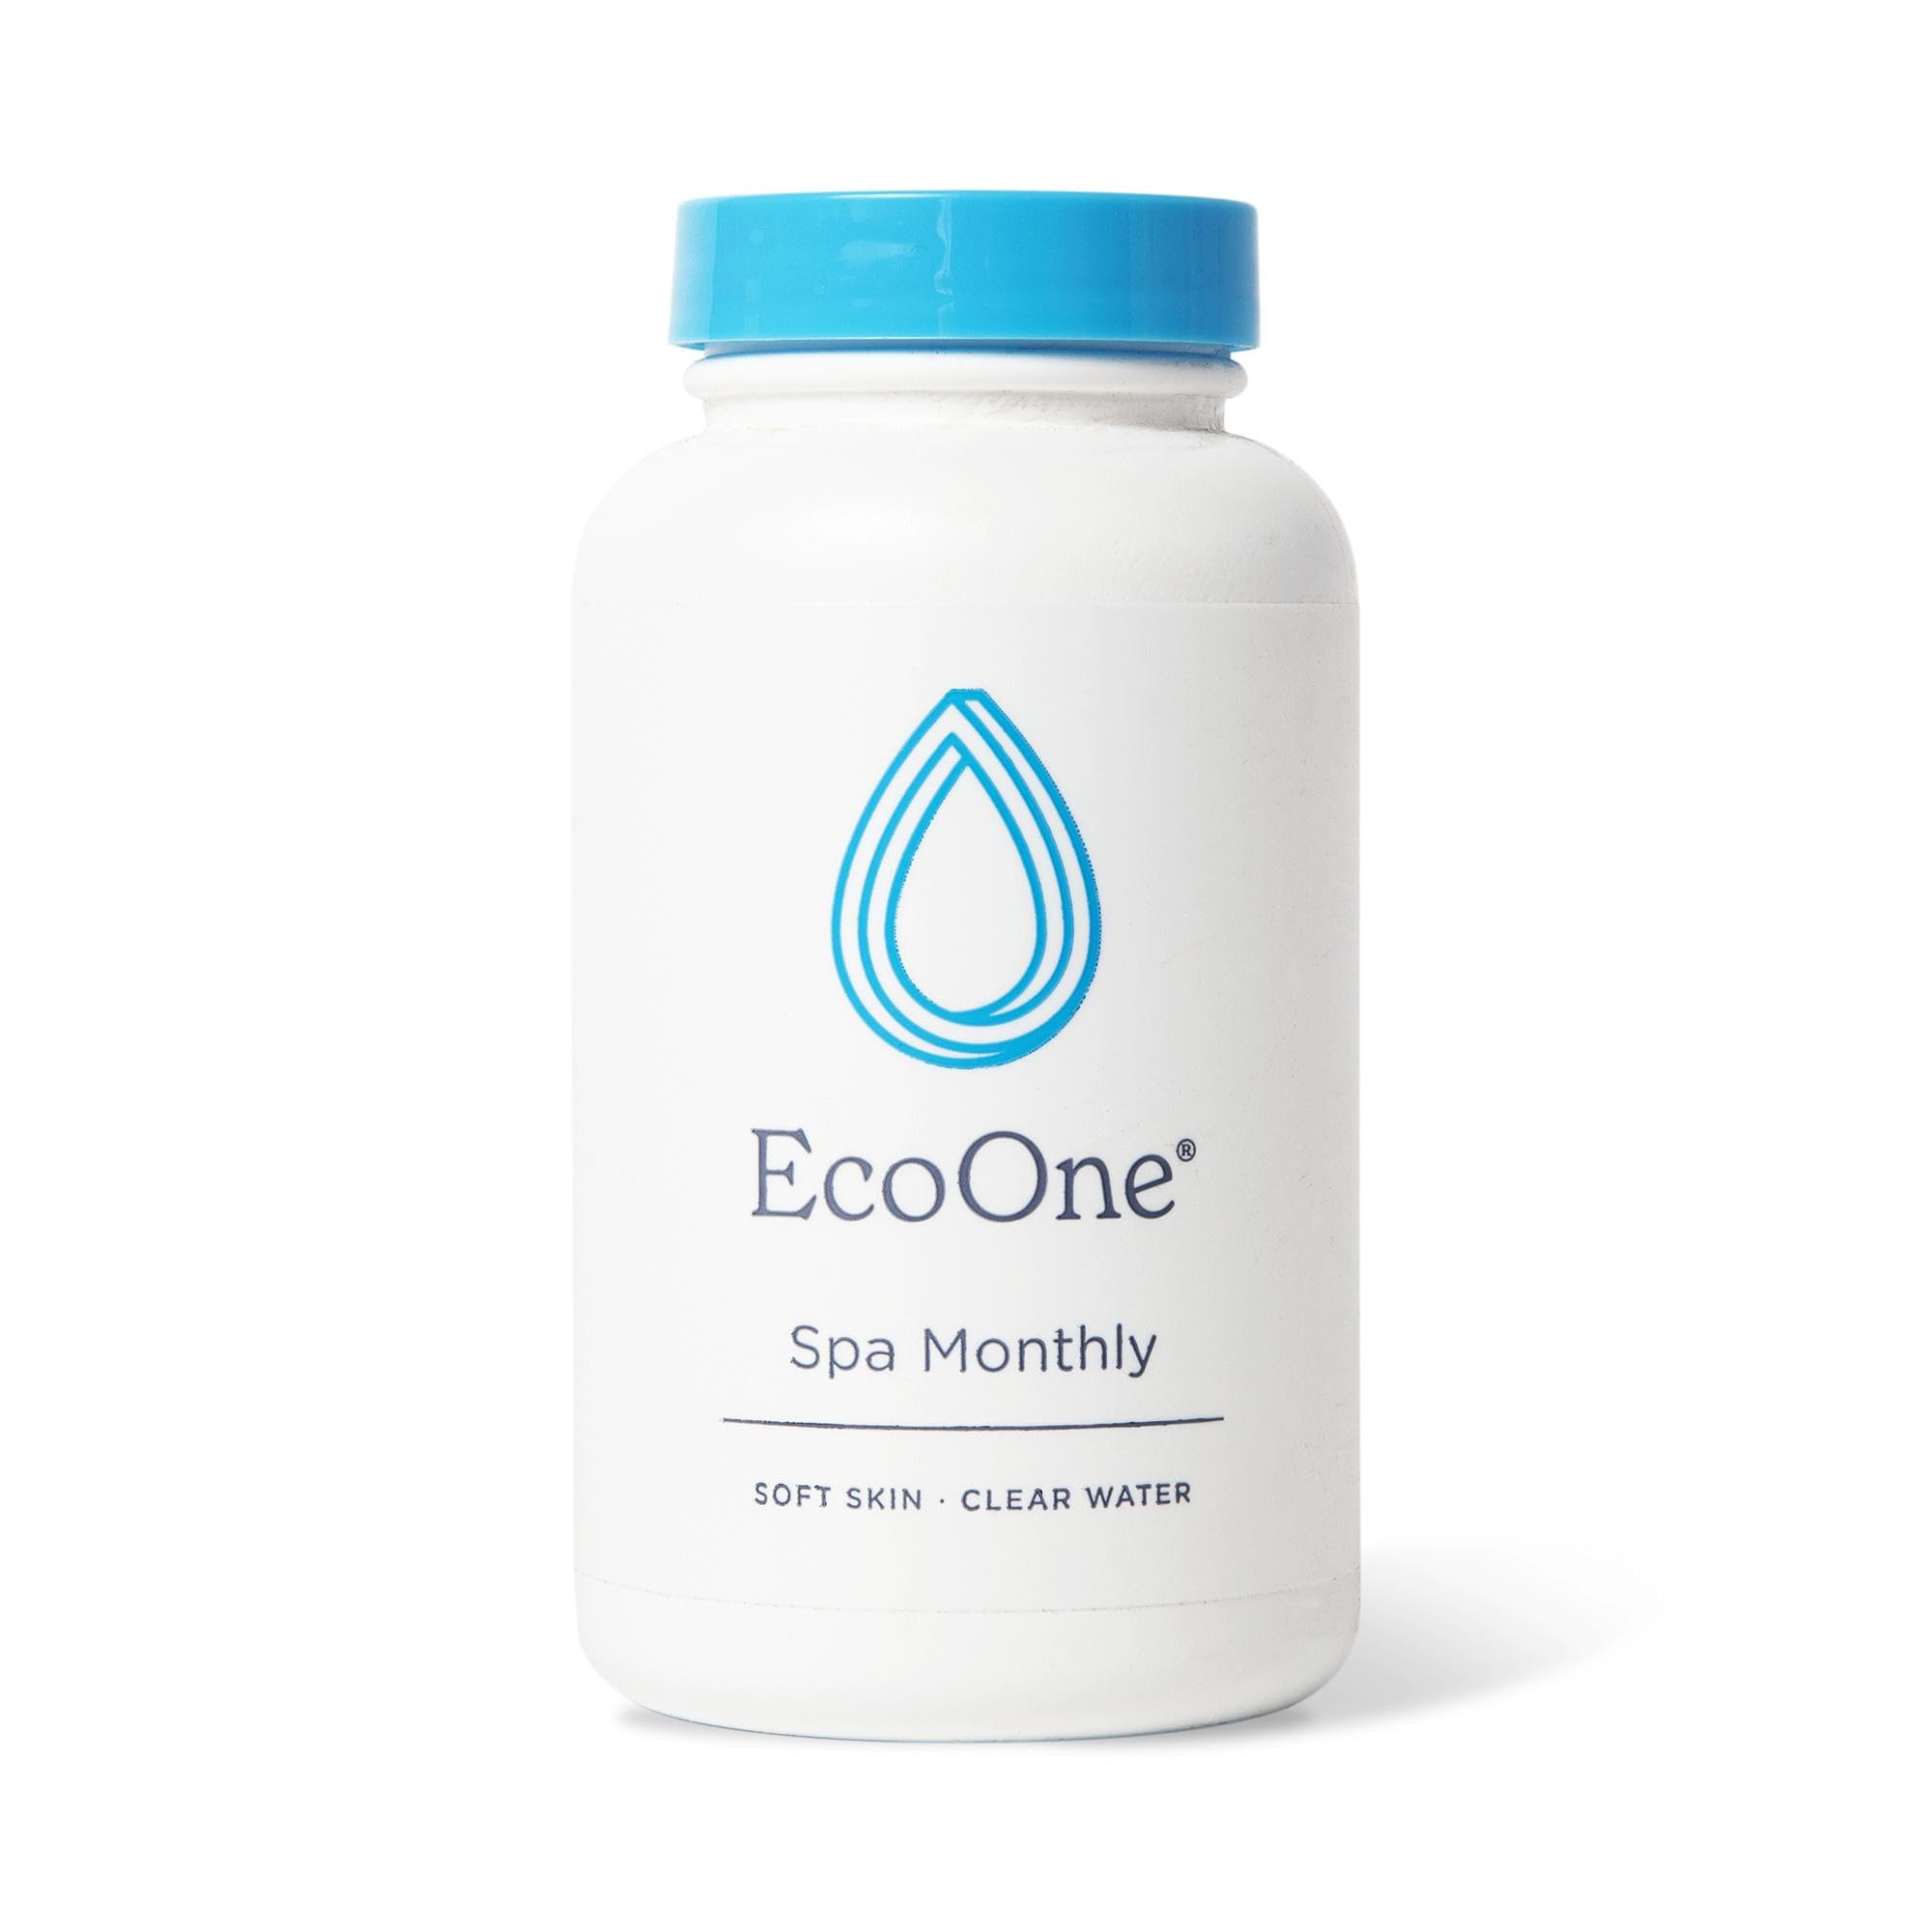 ecoone Spa Monthly, Spa & Hot Tub Water Conditioner, 8 oz